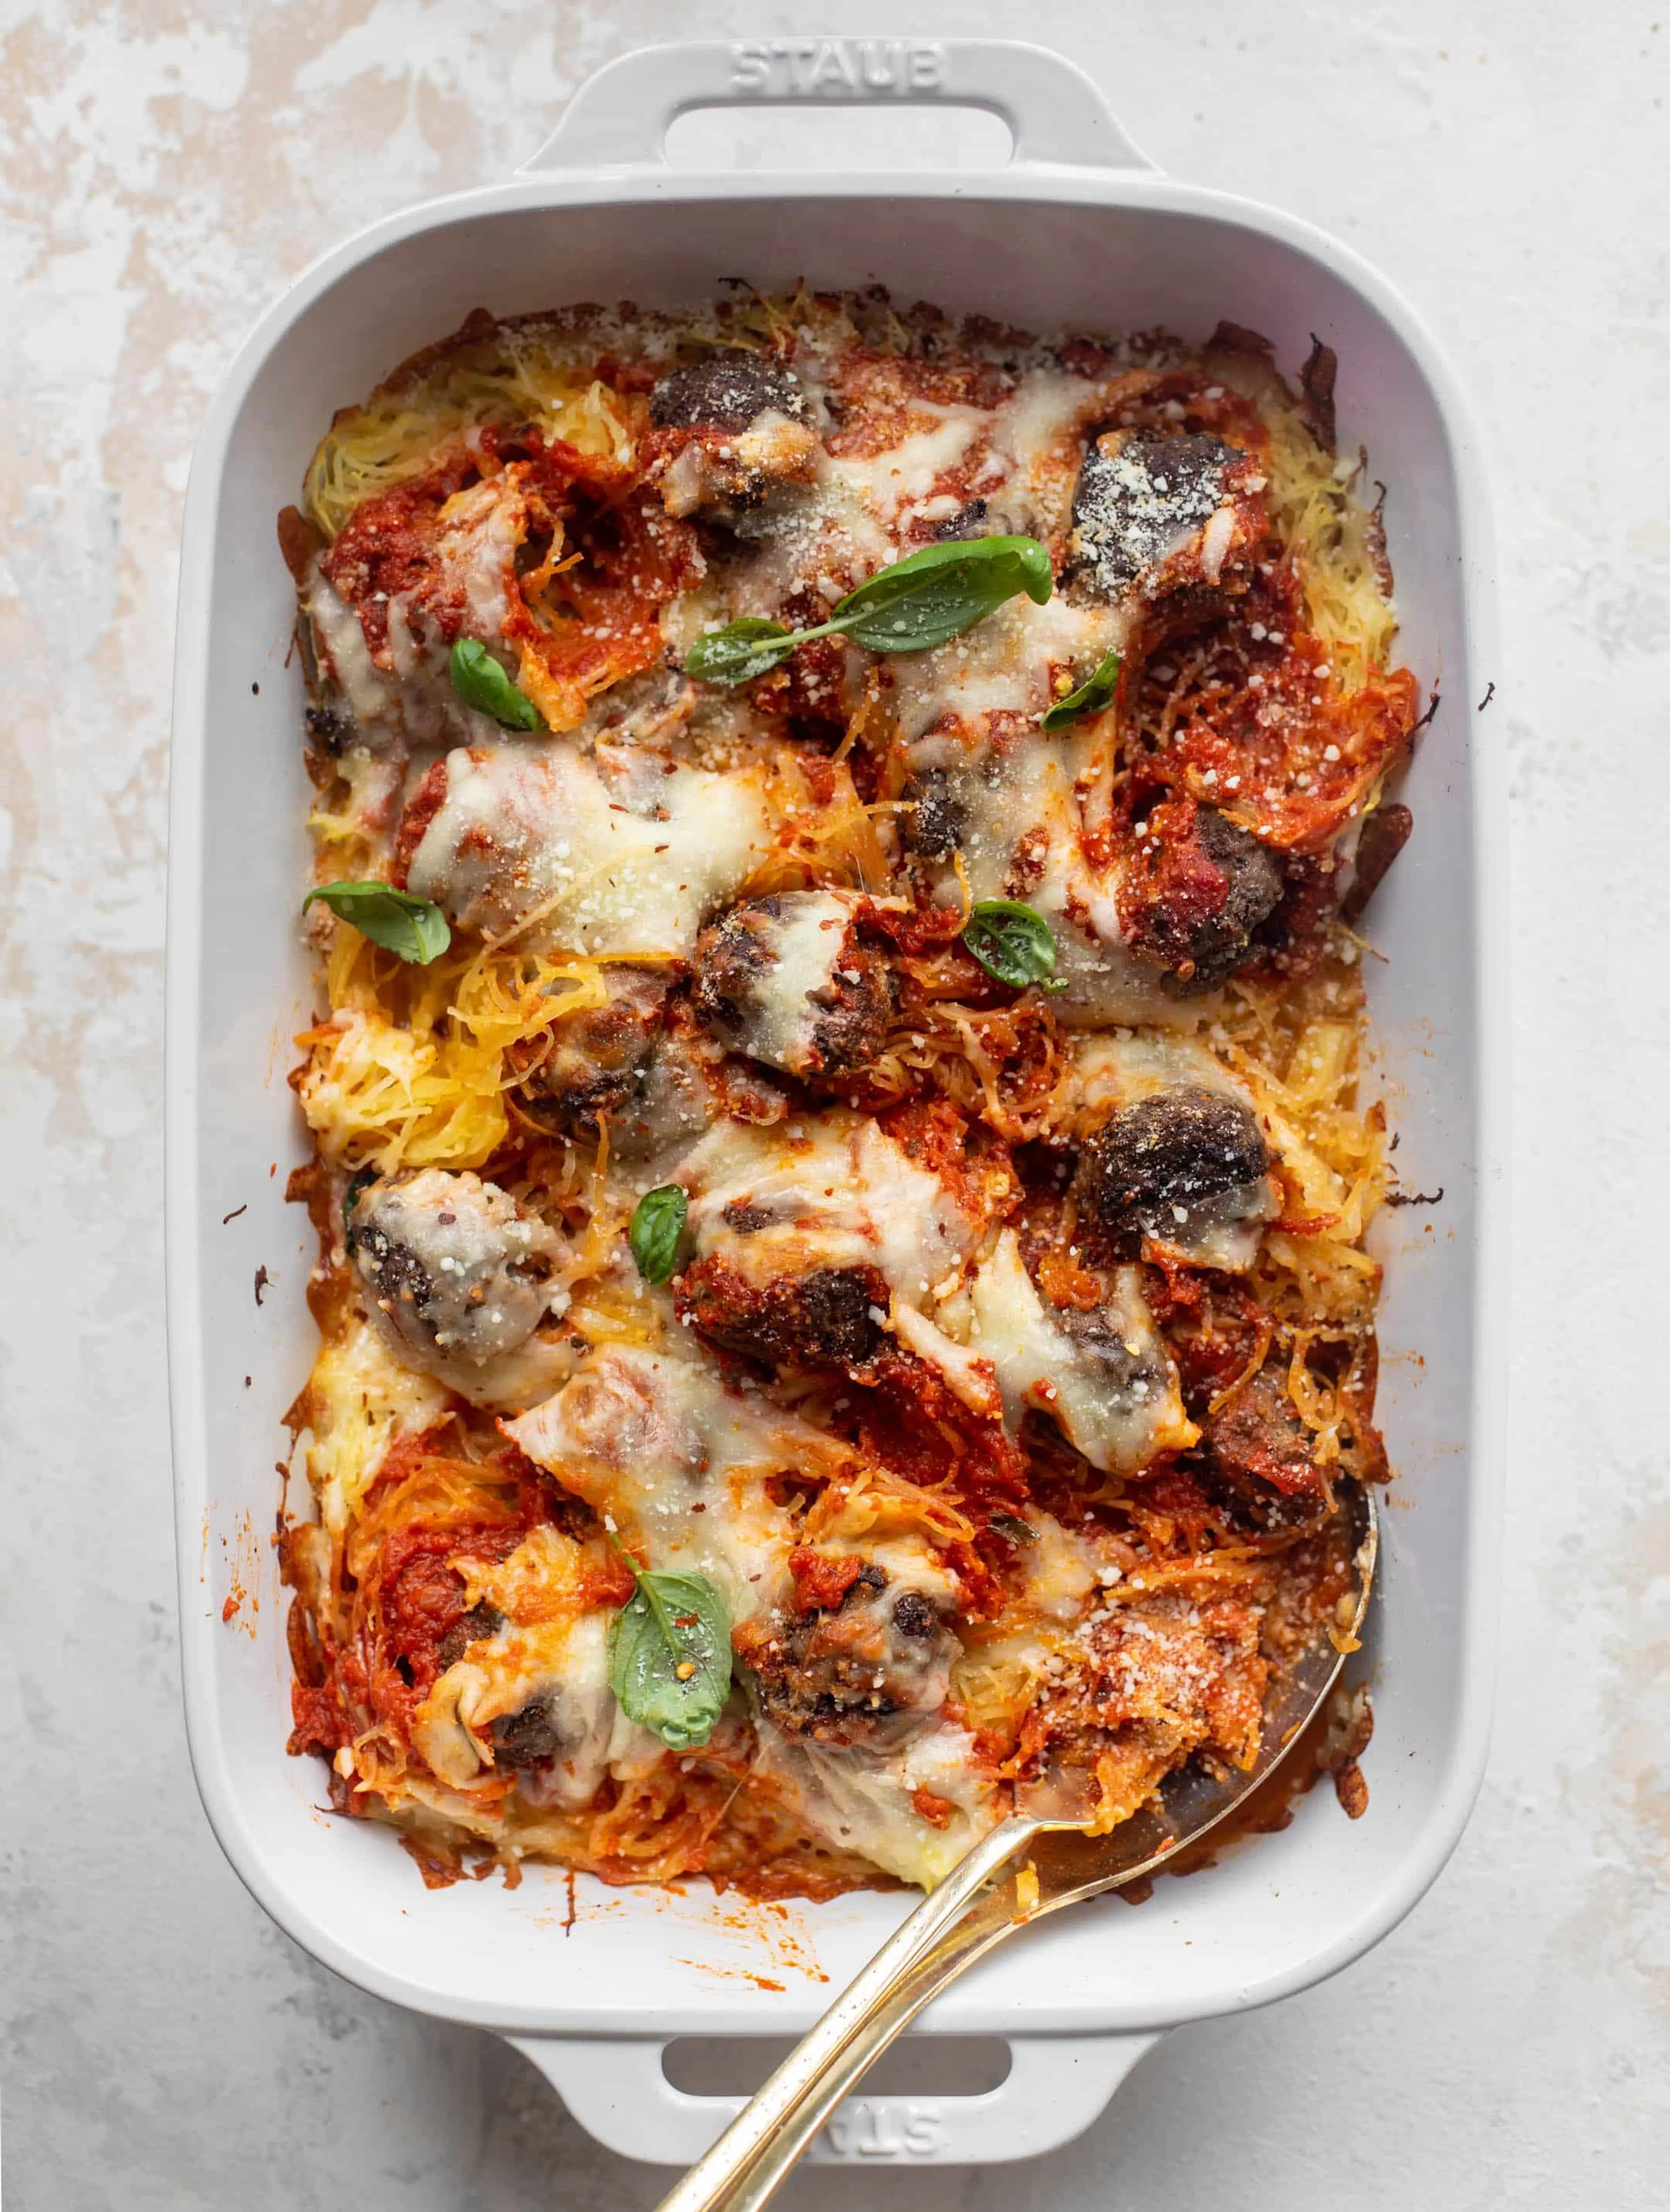 Baked Spaghetti Squash and Meatballs